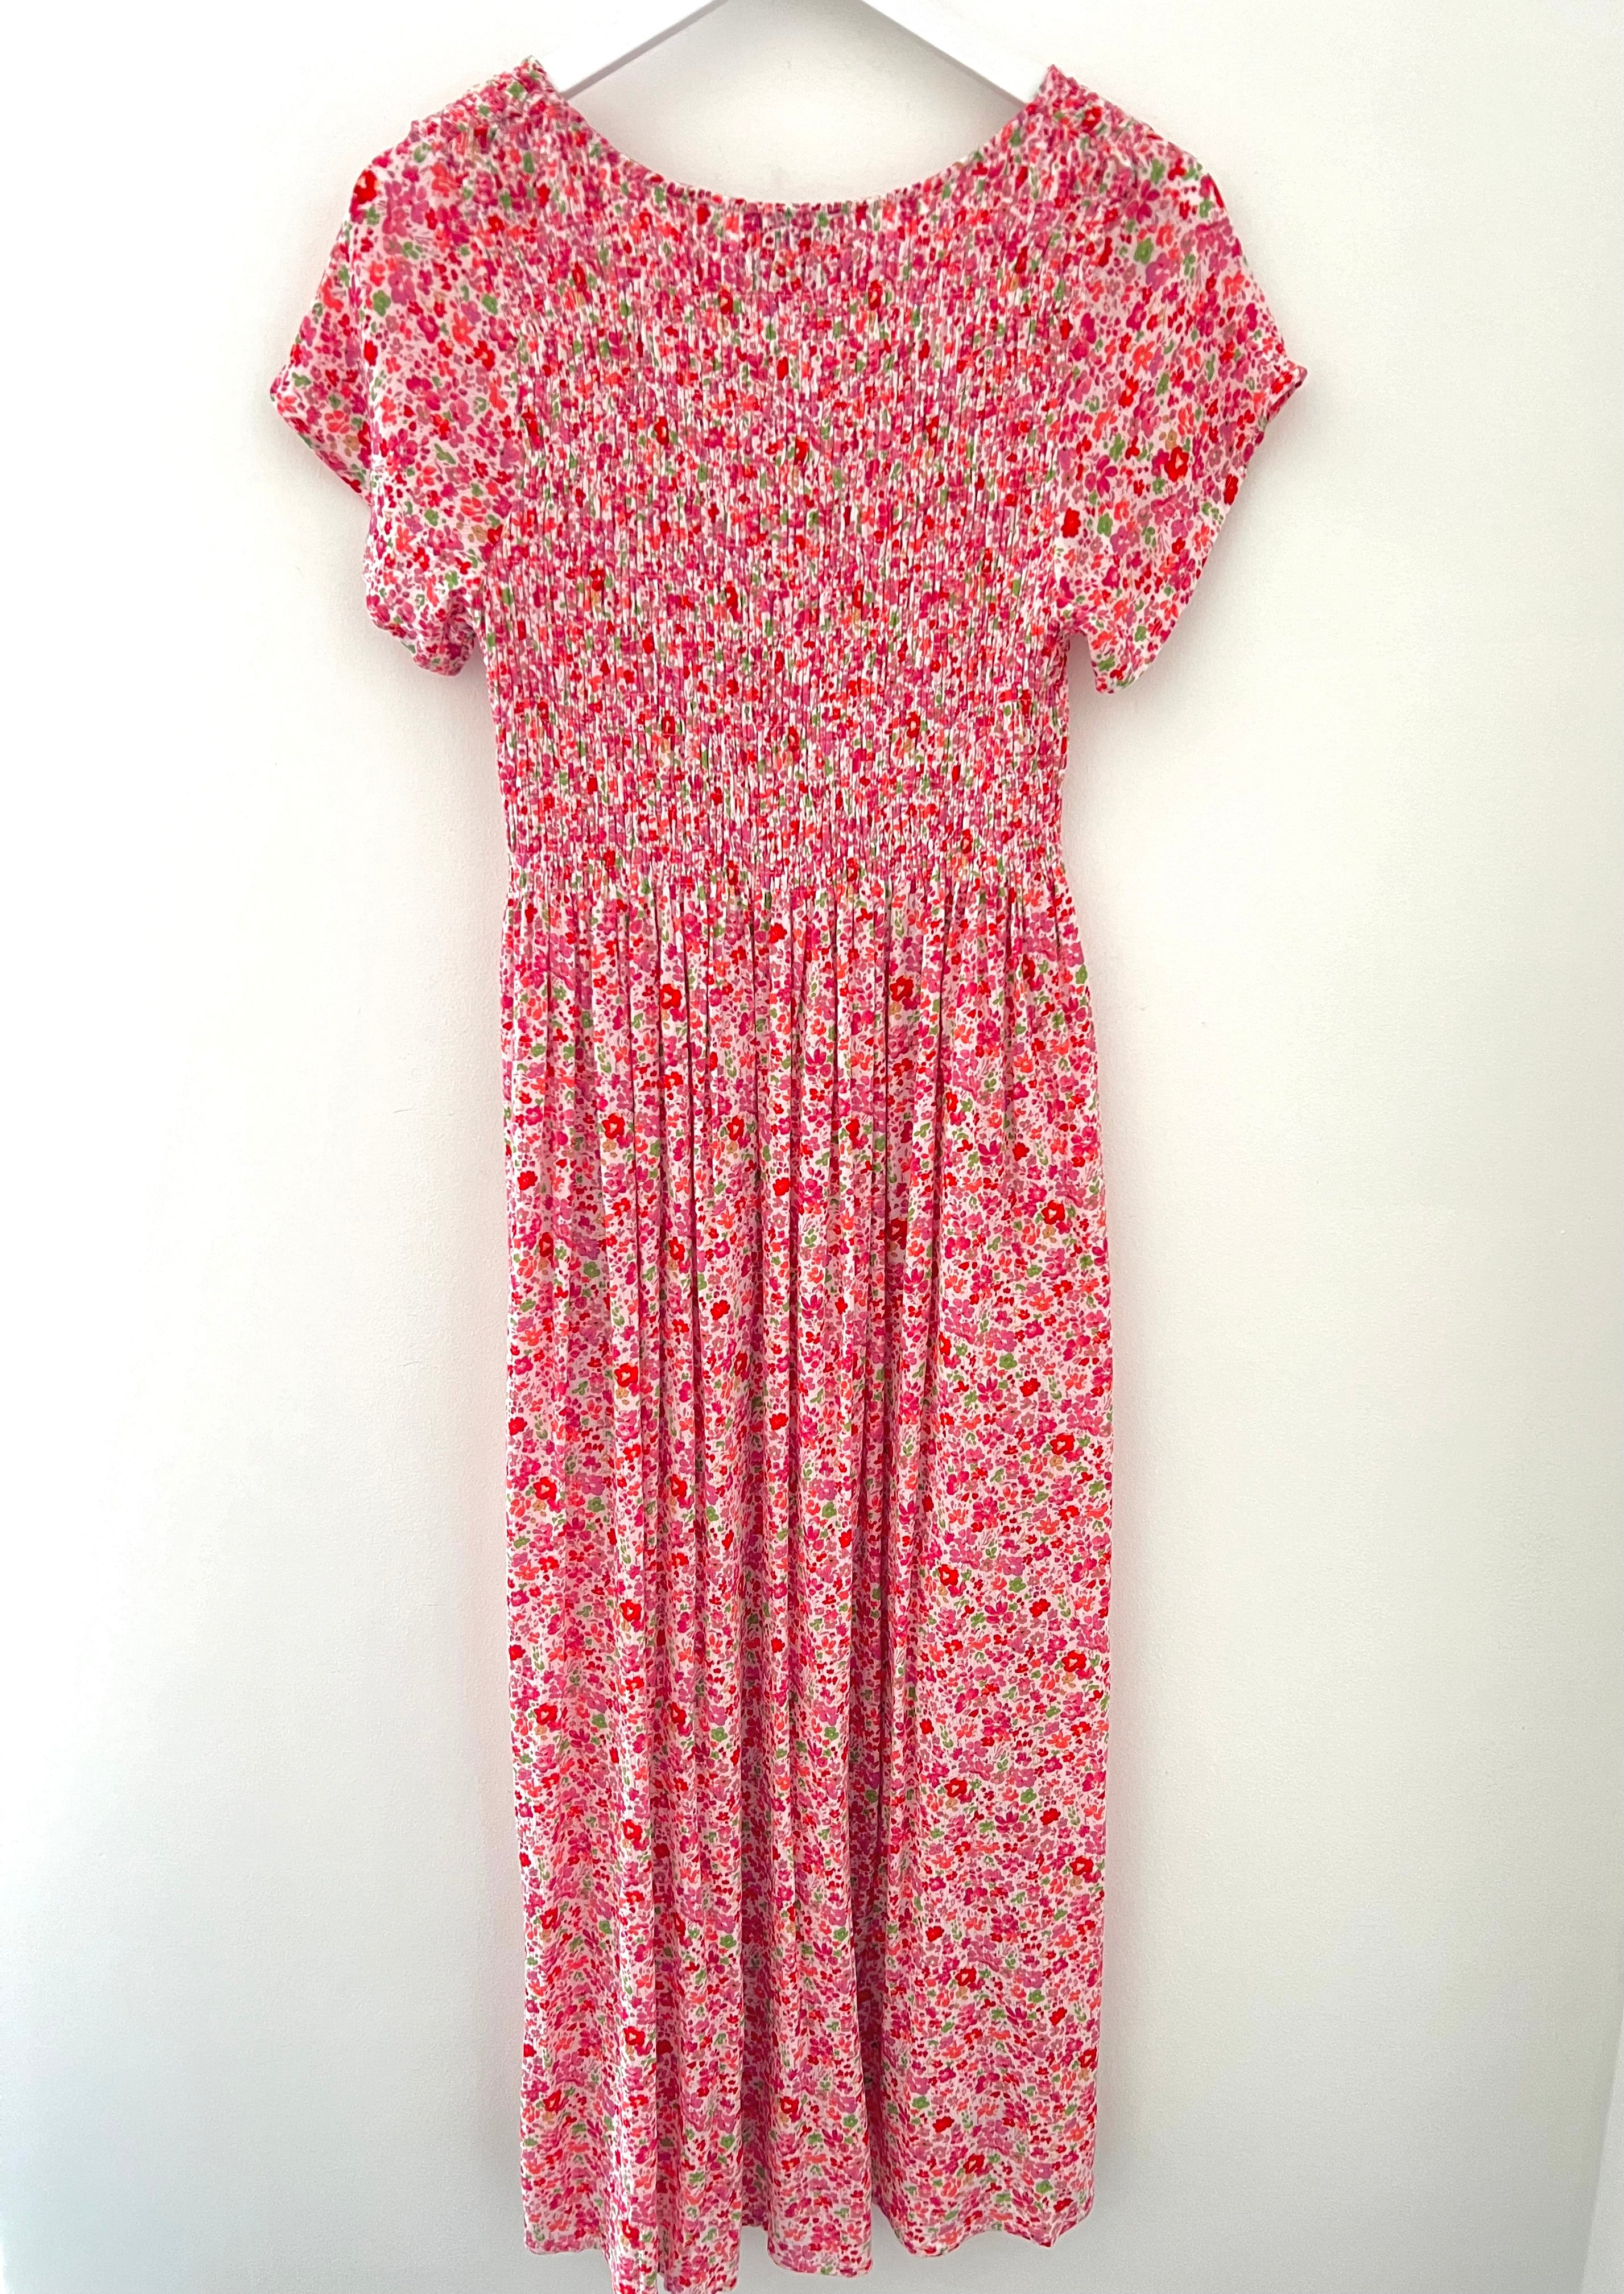 Shirred Ditsy Dress in Pink & Red